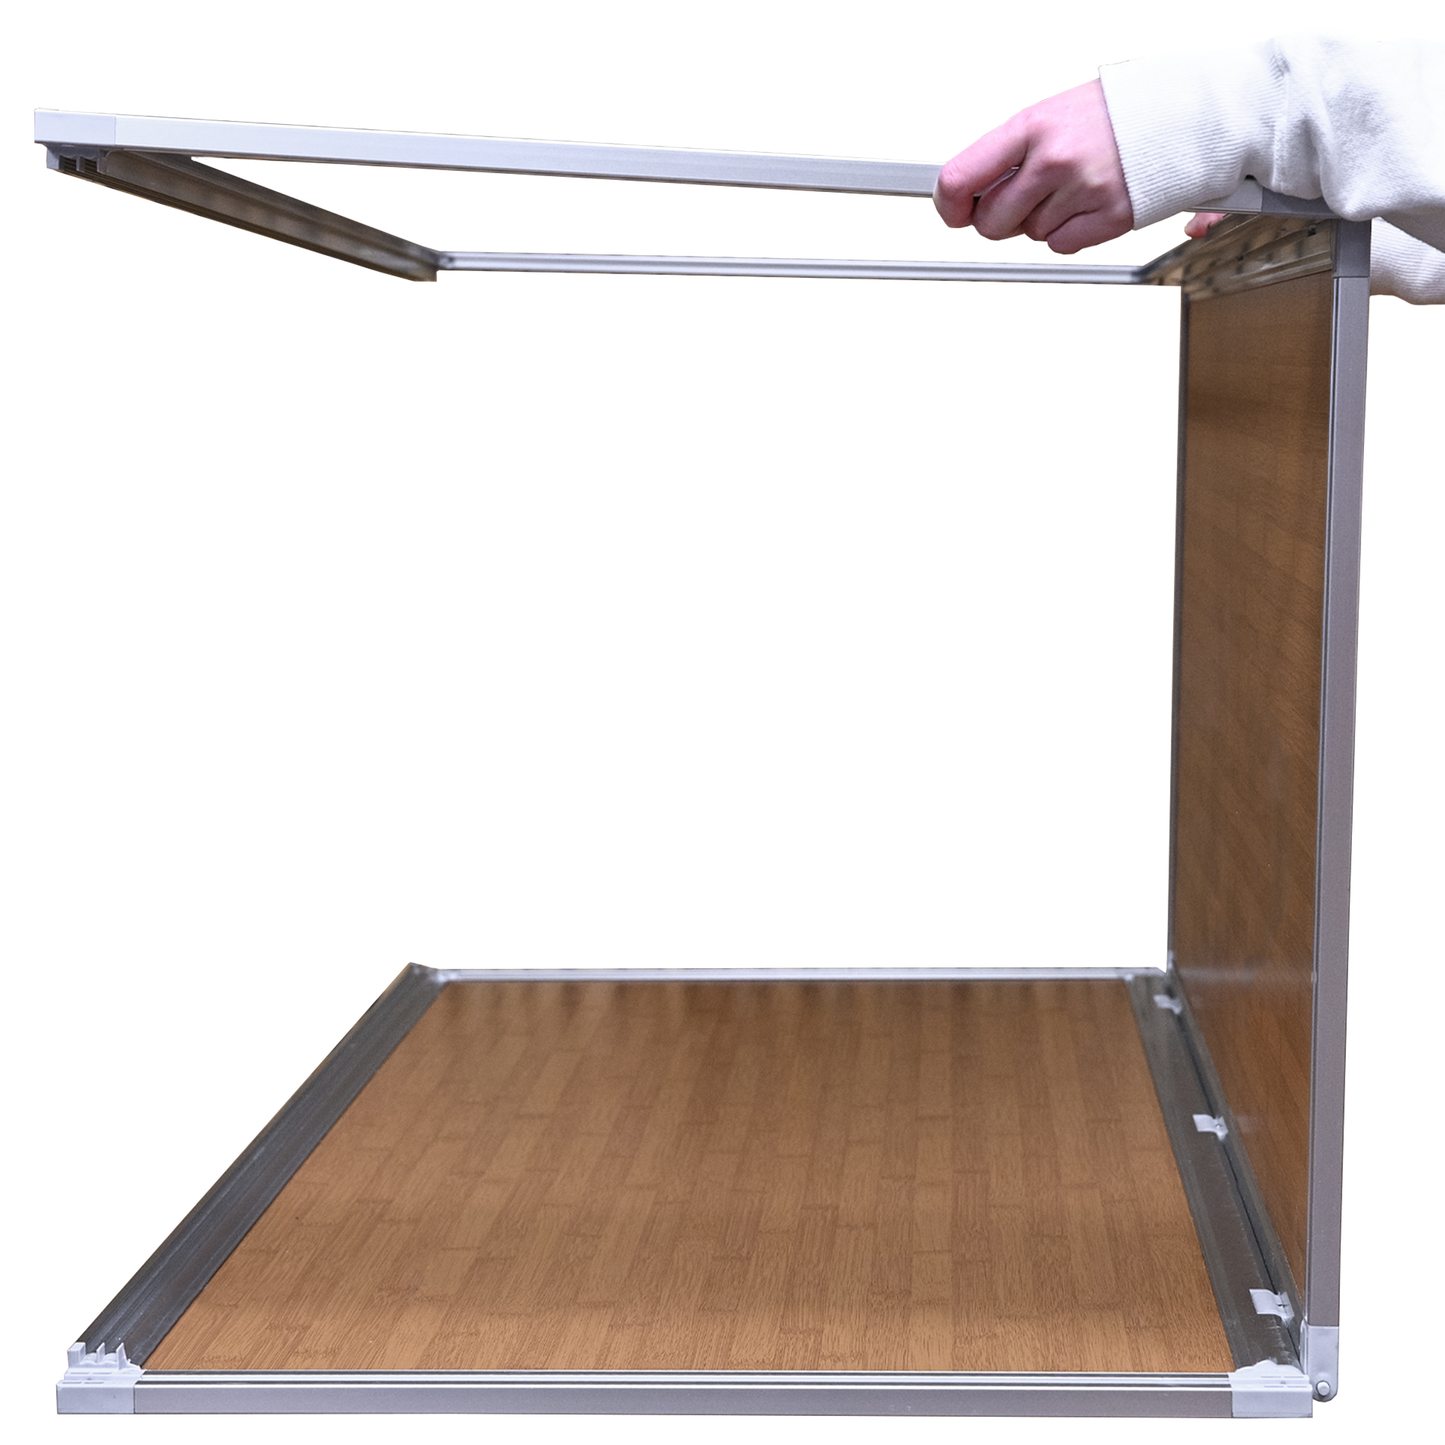 Meridian Cabinet Stand – for 4’x2’ based Meridian enclosures